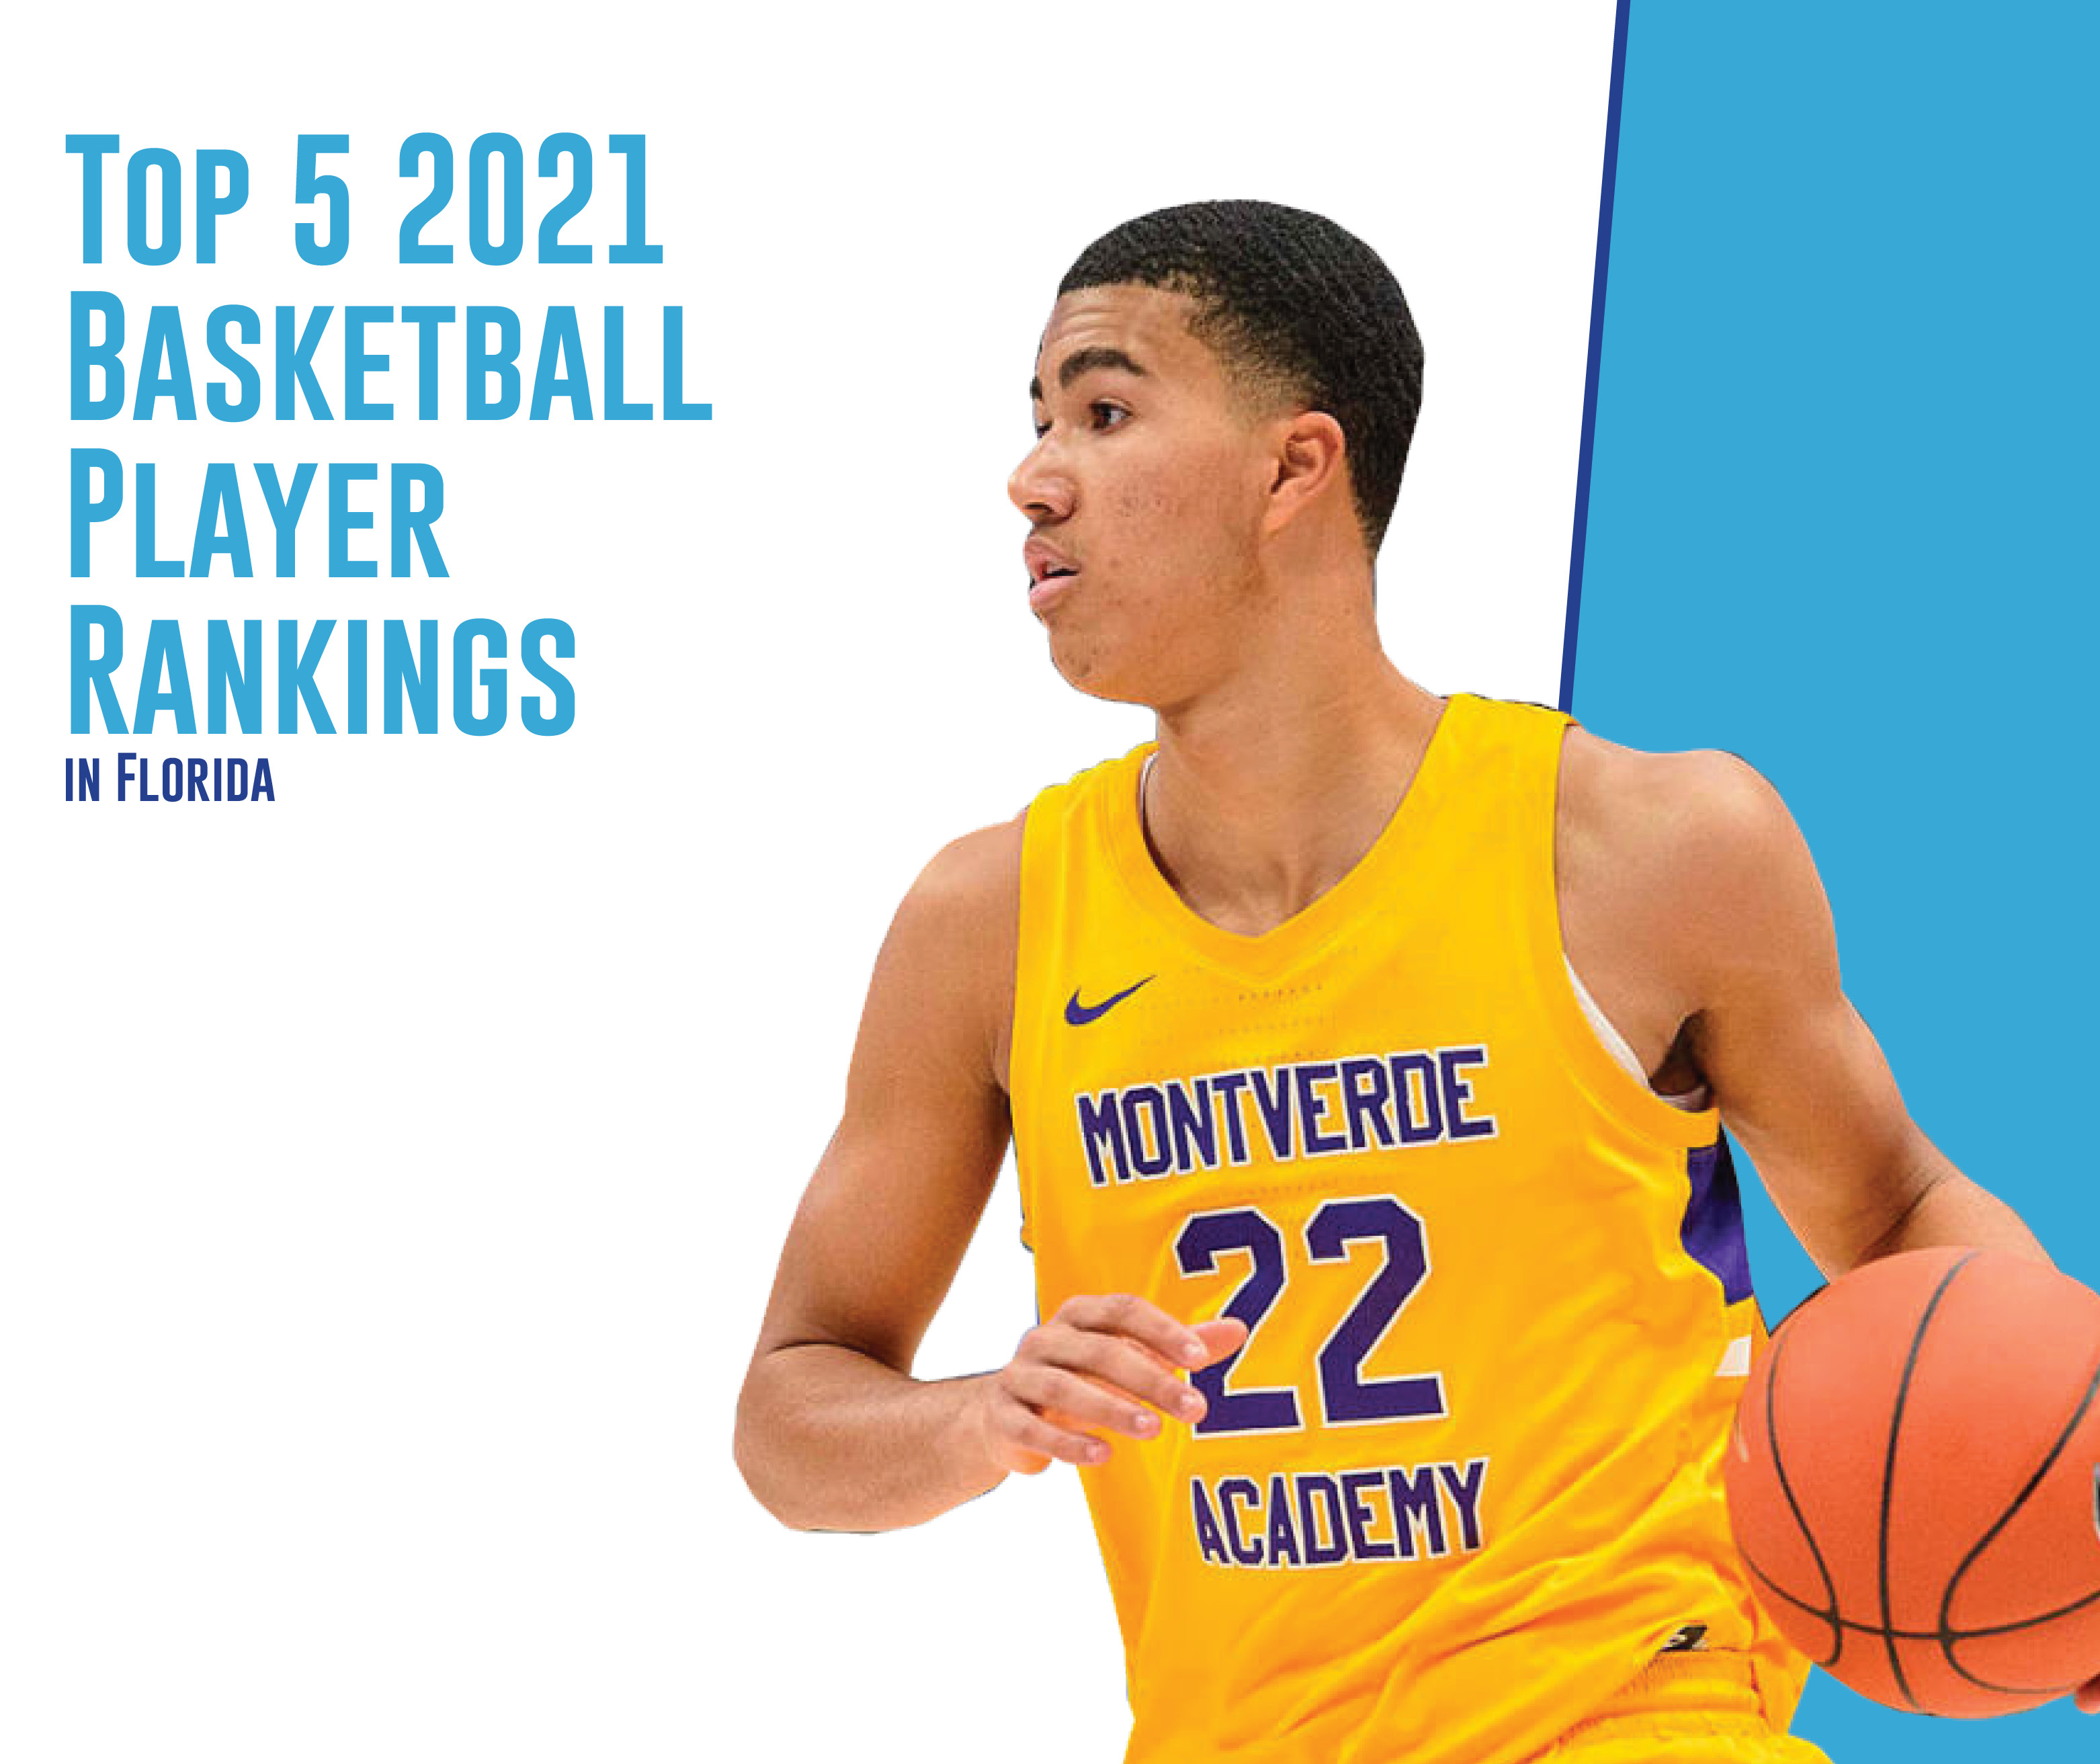 Top 5 2021 High School Basketball Player Rankings in Florida - ITG Next